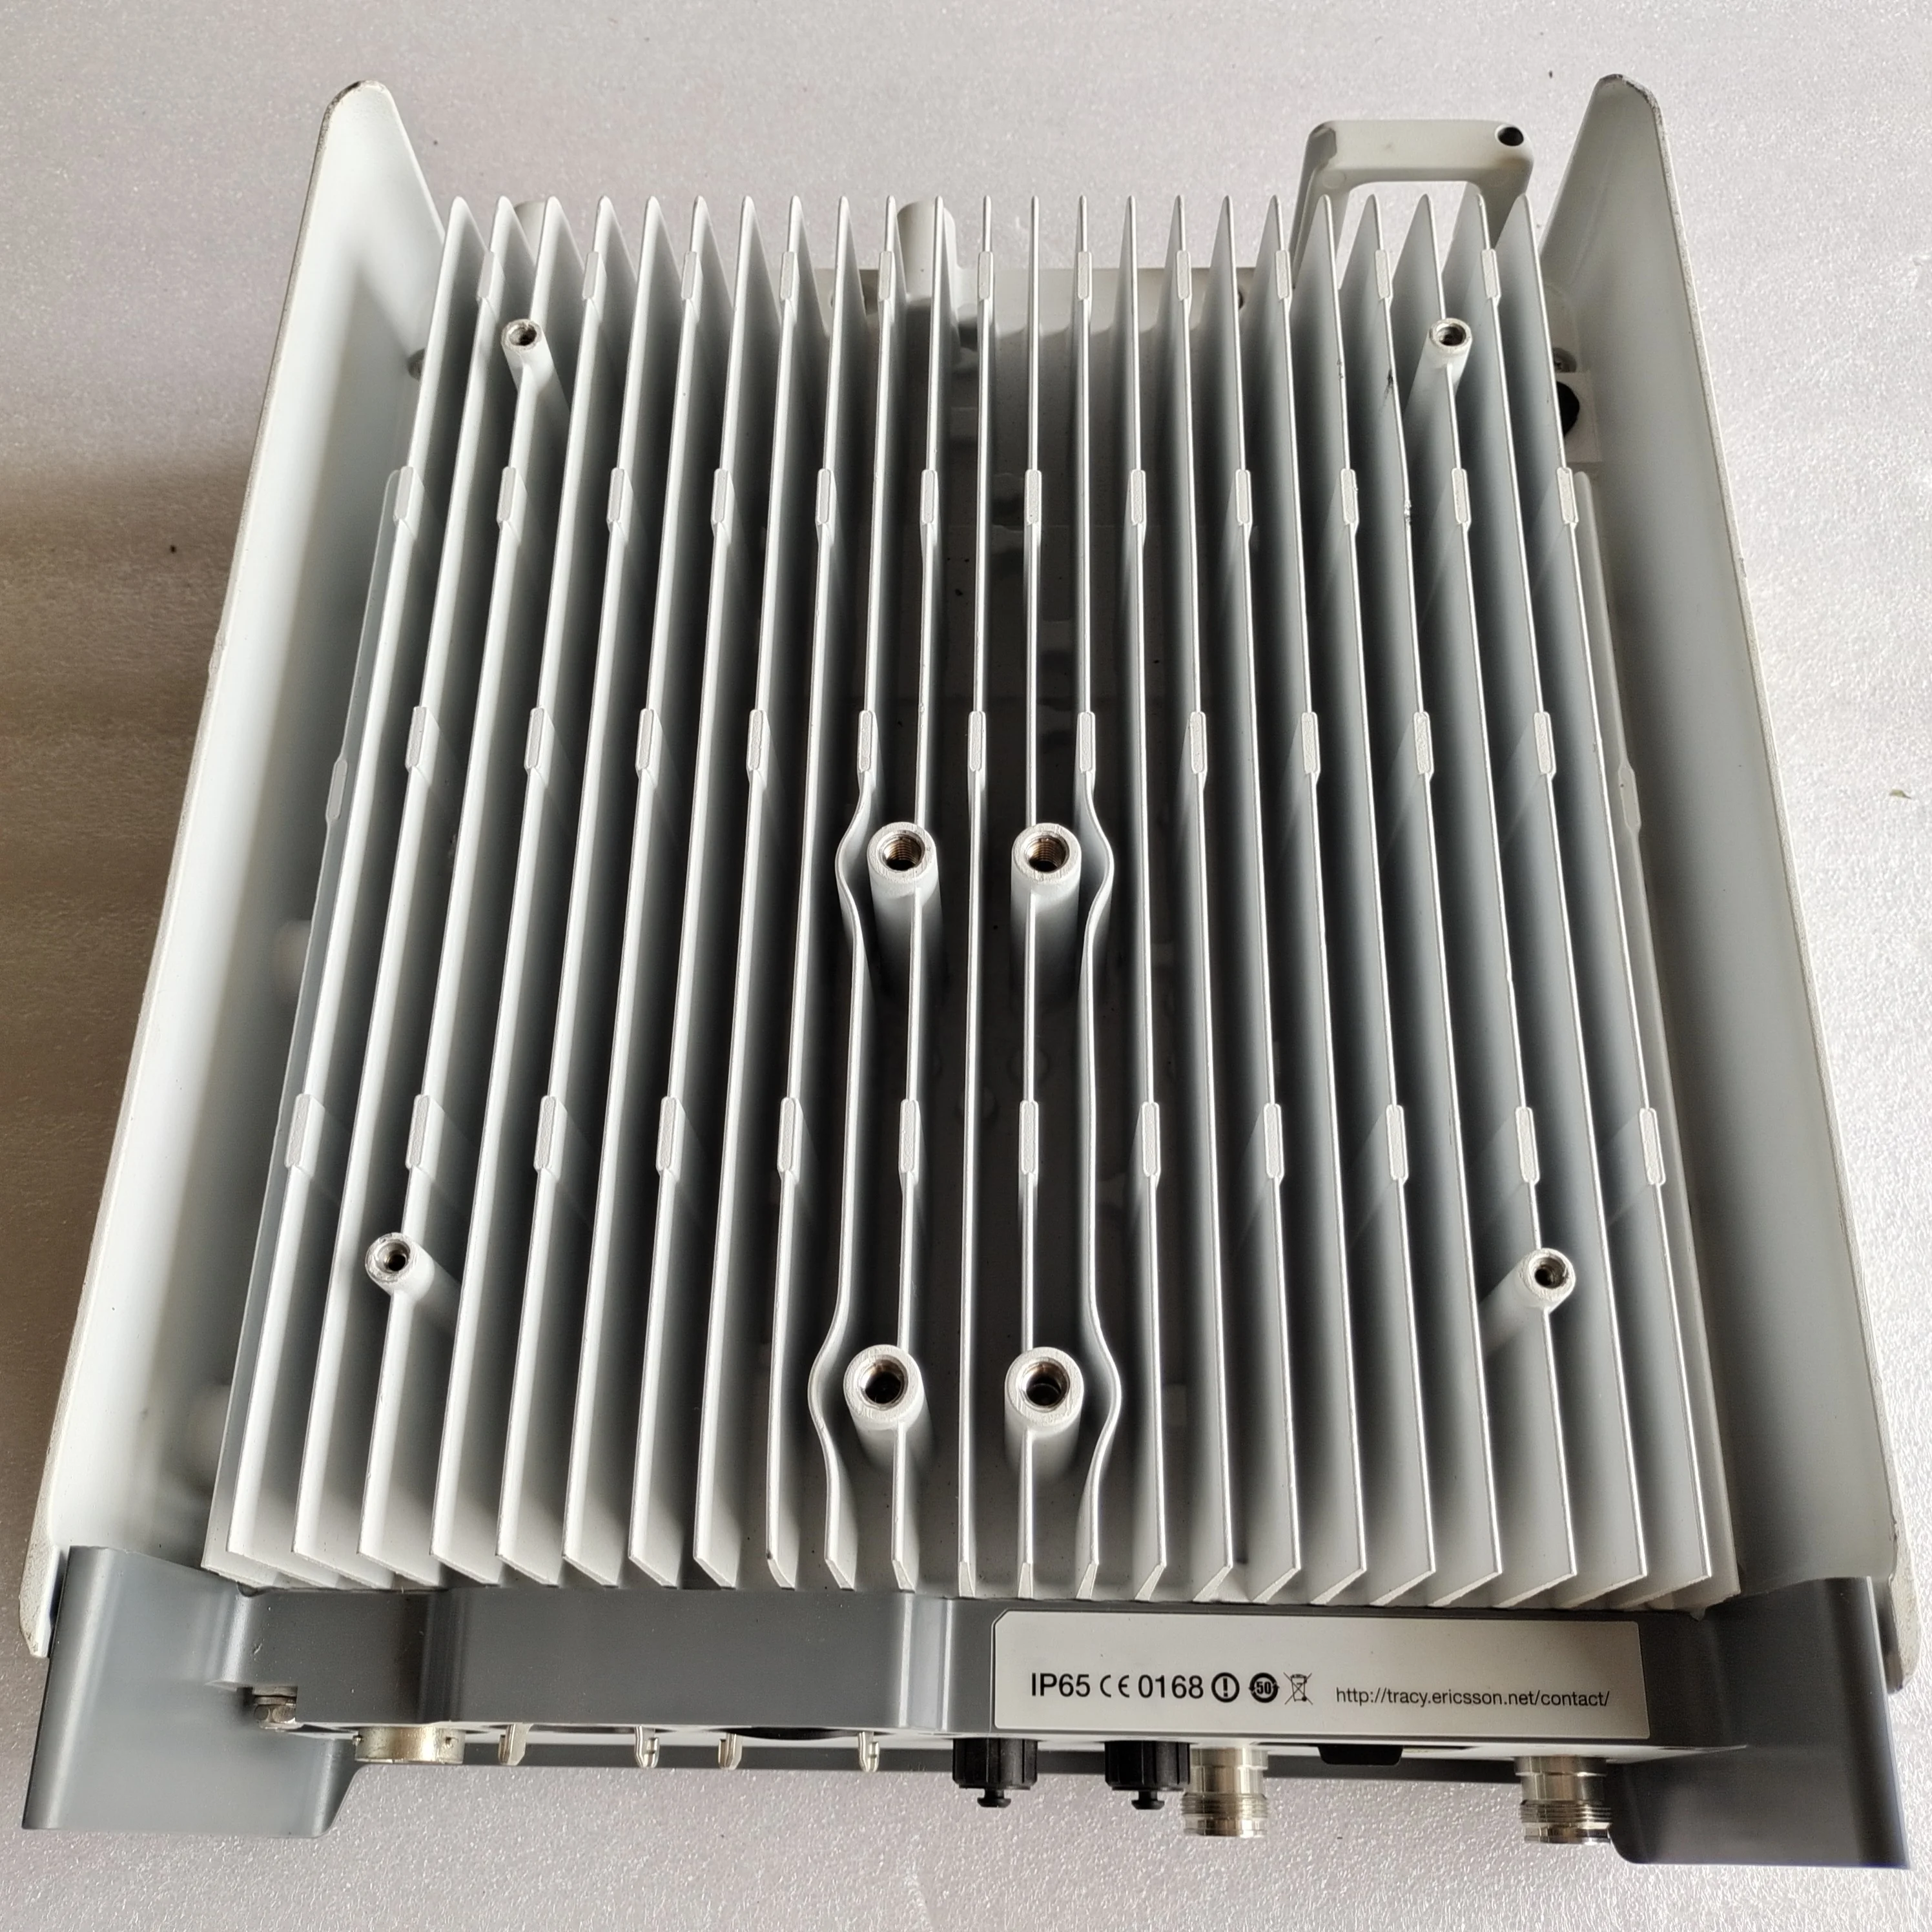 YUNPAN different gsm bts base station factory for stairwells-4